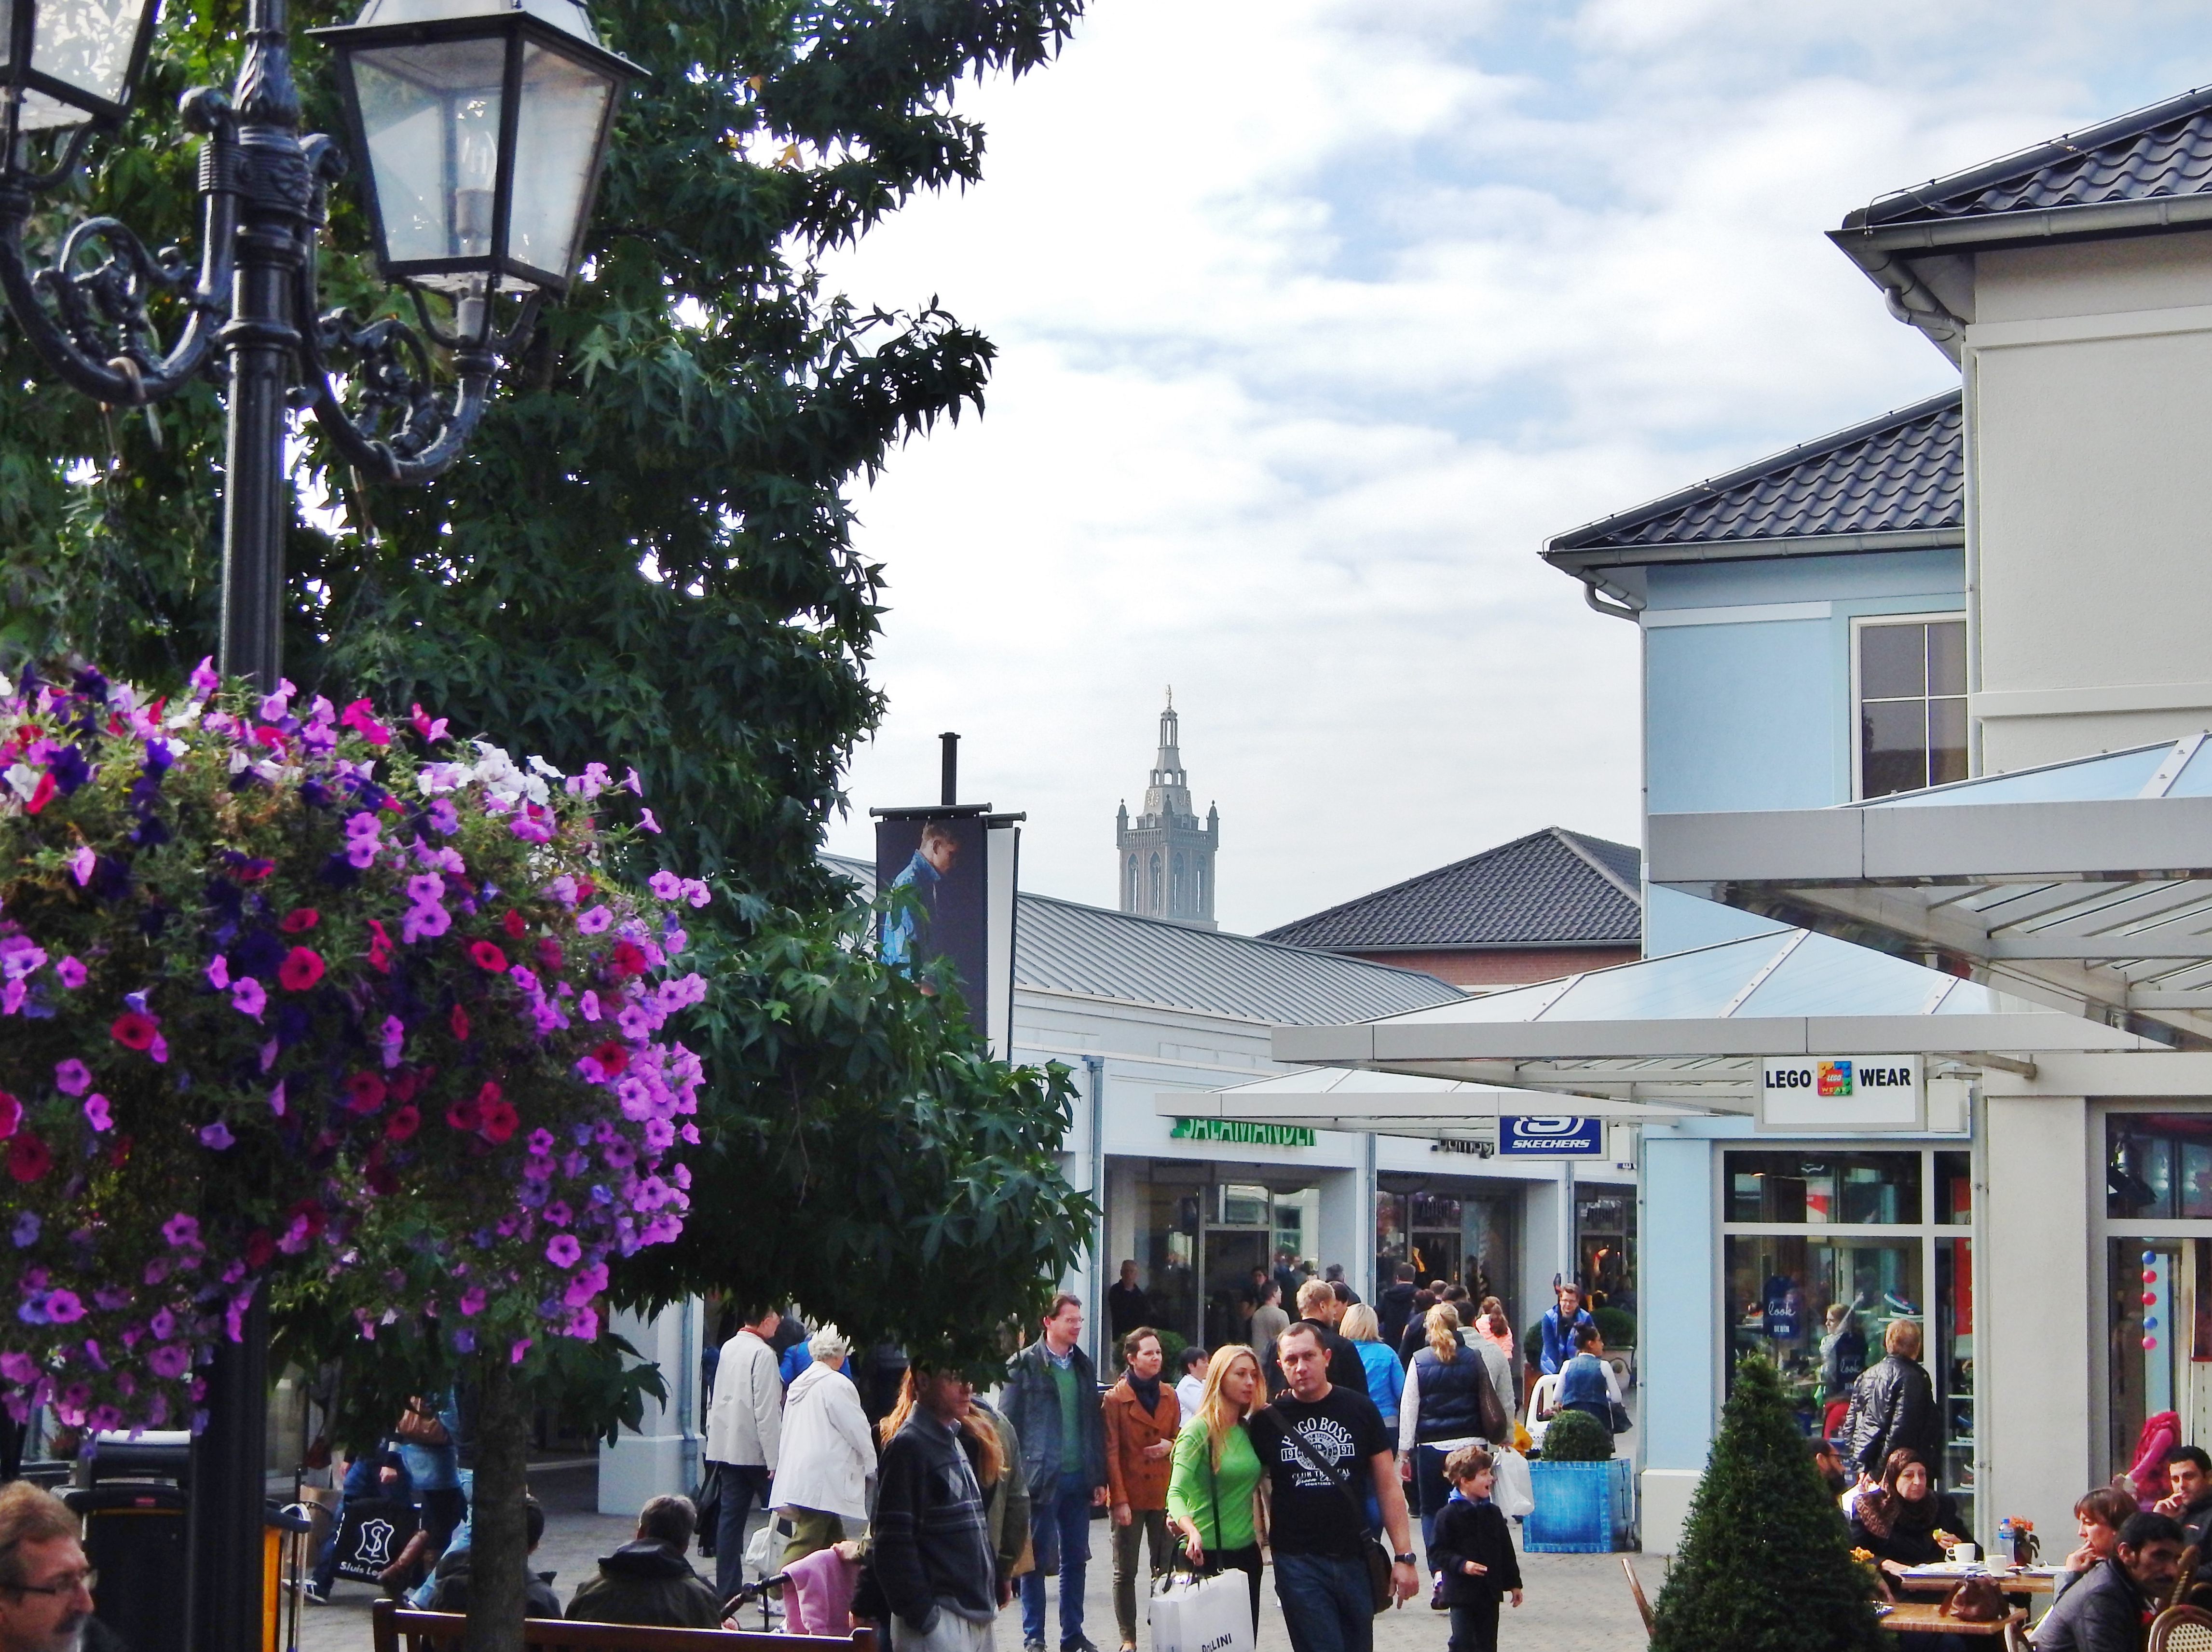 File:Designer Outlet Roermond - panoramio (1).jpg - Wikimedia Commons